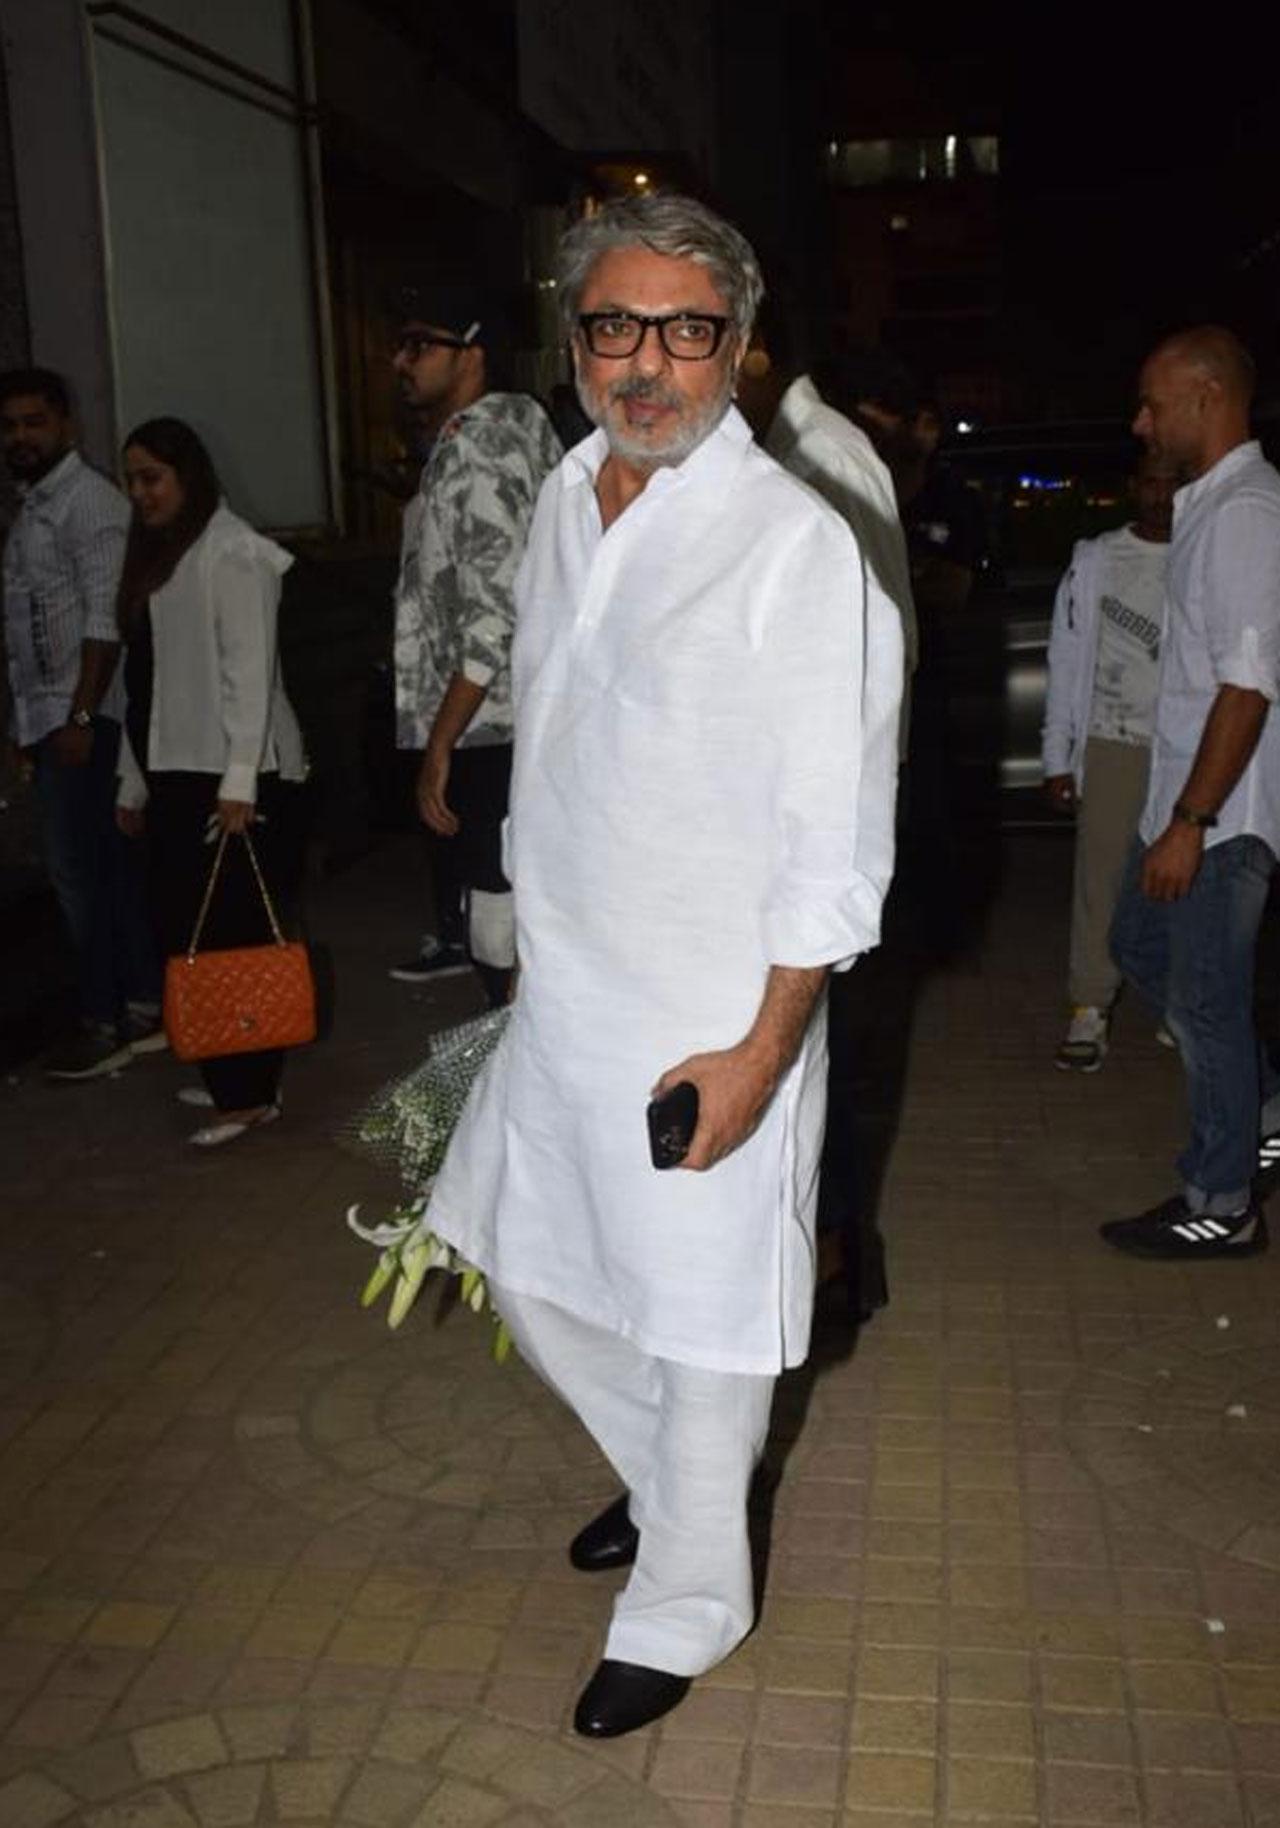 Sanjay Leela Bhansali always had a penchant for white and at the screening, he carried it off one more time. He completed 25 years as a filmmaker in 2021. His latest release reached the Berlin Film Festival. The magnum opus was screened for the International audience and critics ahead of its theatrical release.